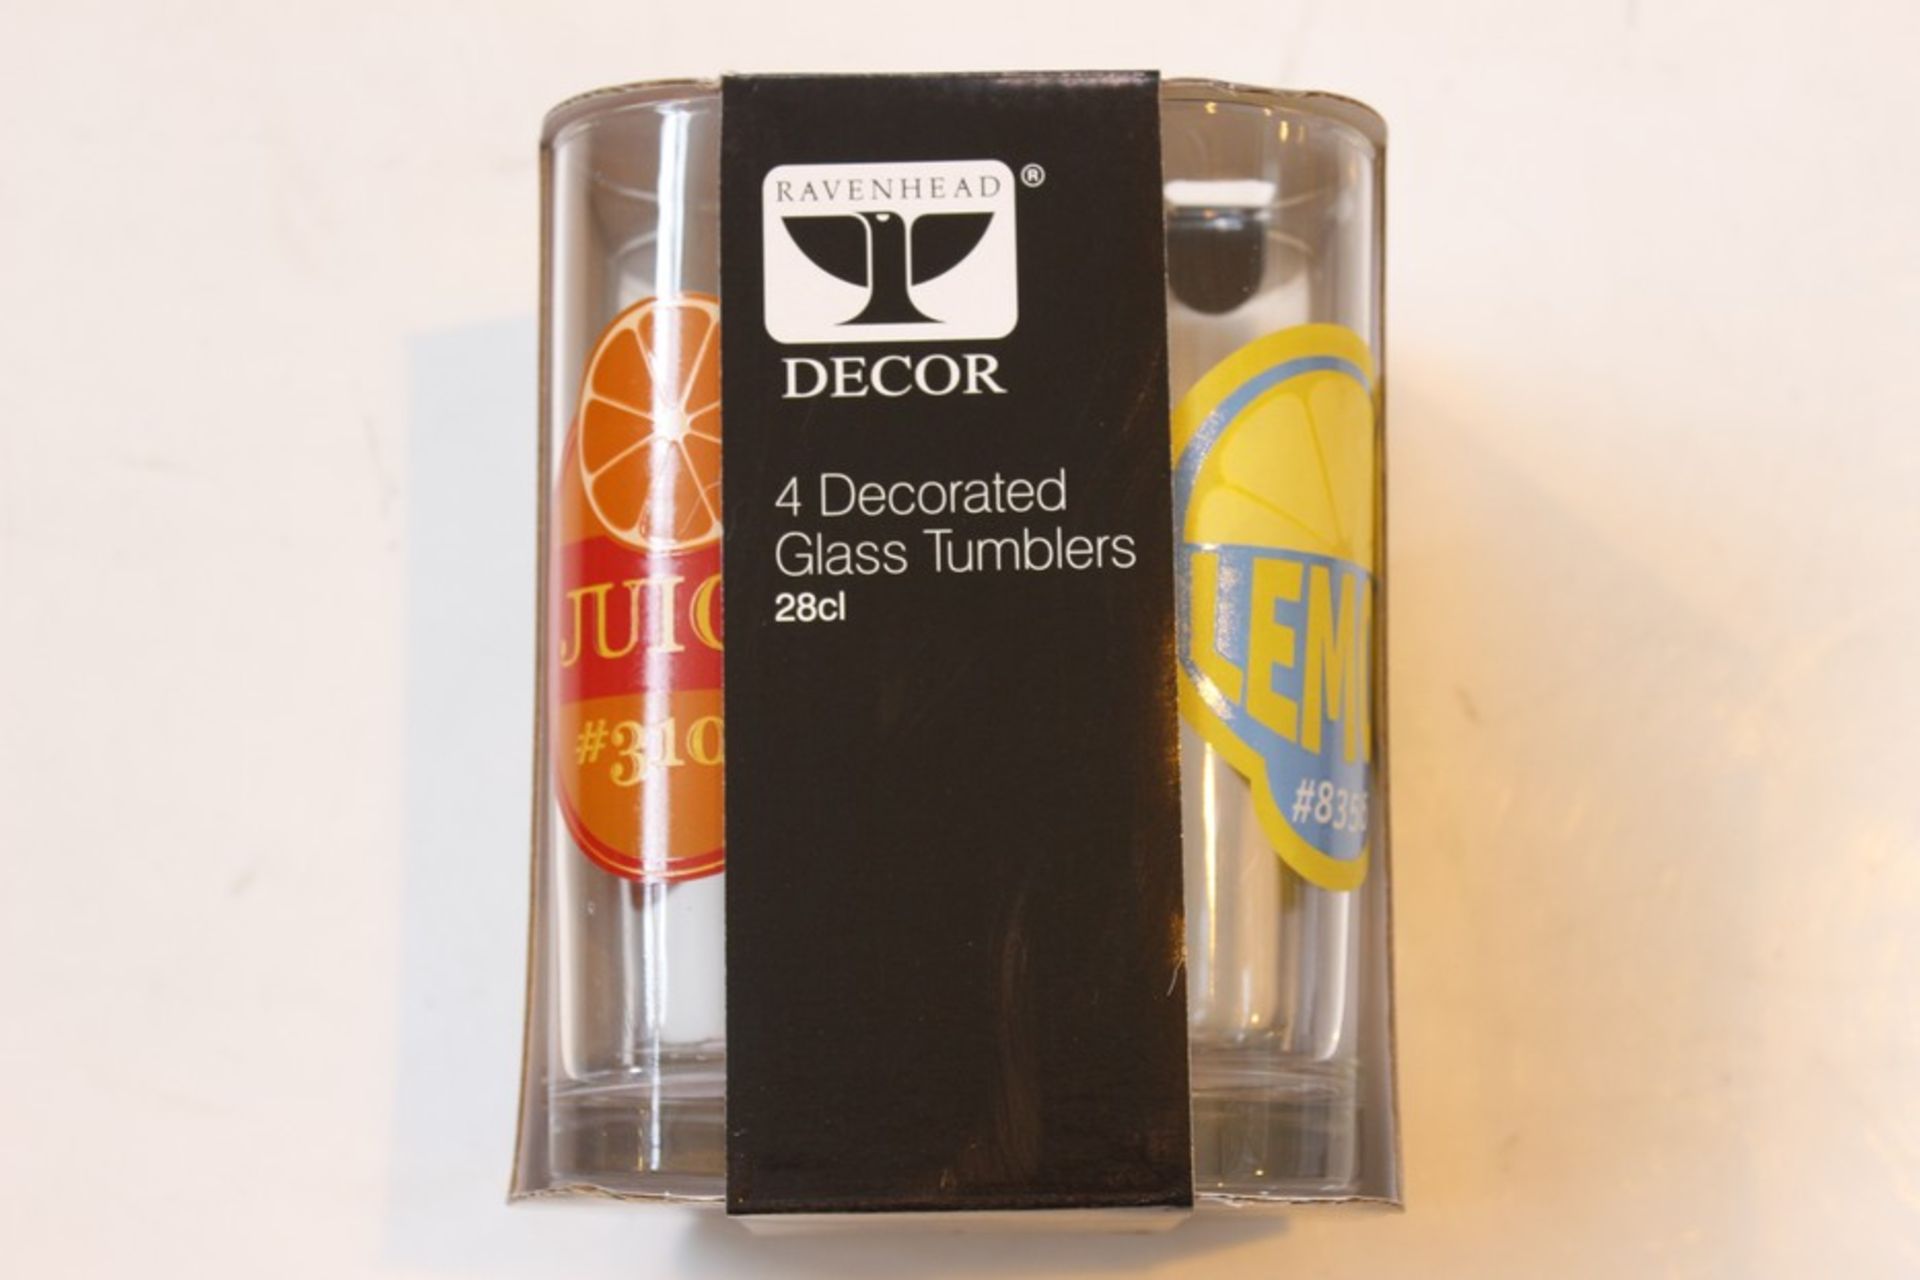 6 x BRAND NEW PACKS OF 4 RAVENHEAD DECO DECORATED GLASS TUMBLERS  *PLEASE NOTE THAT THE BID PRICE IS